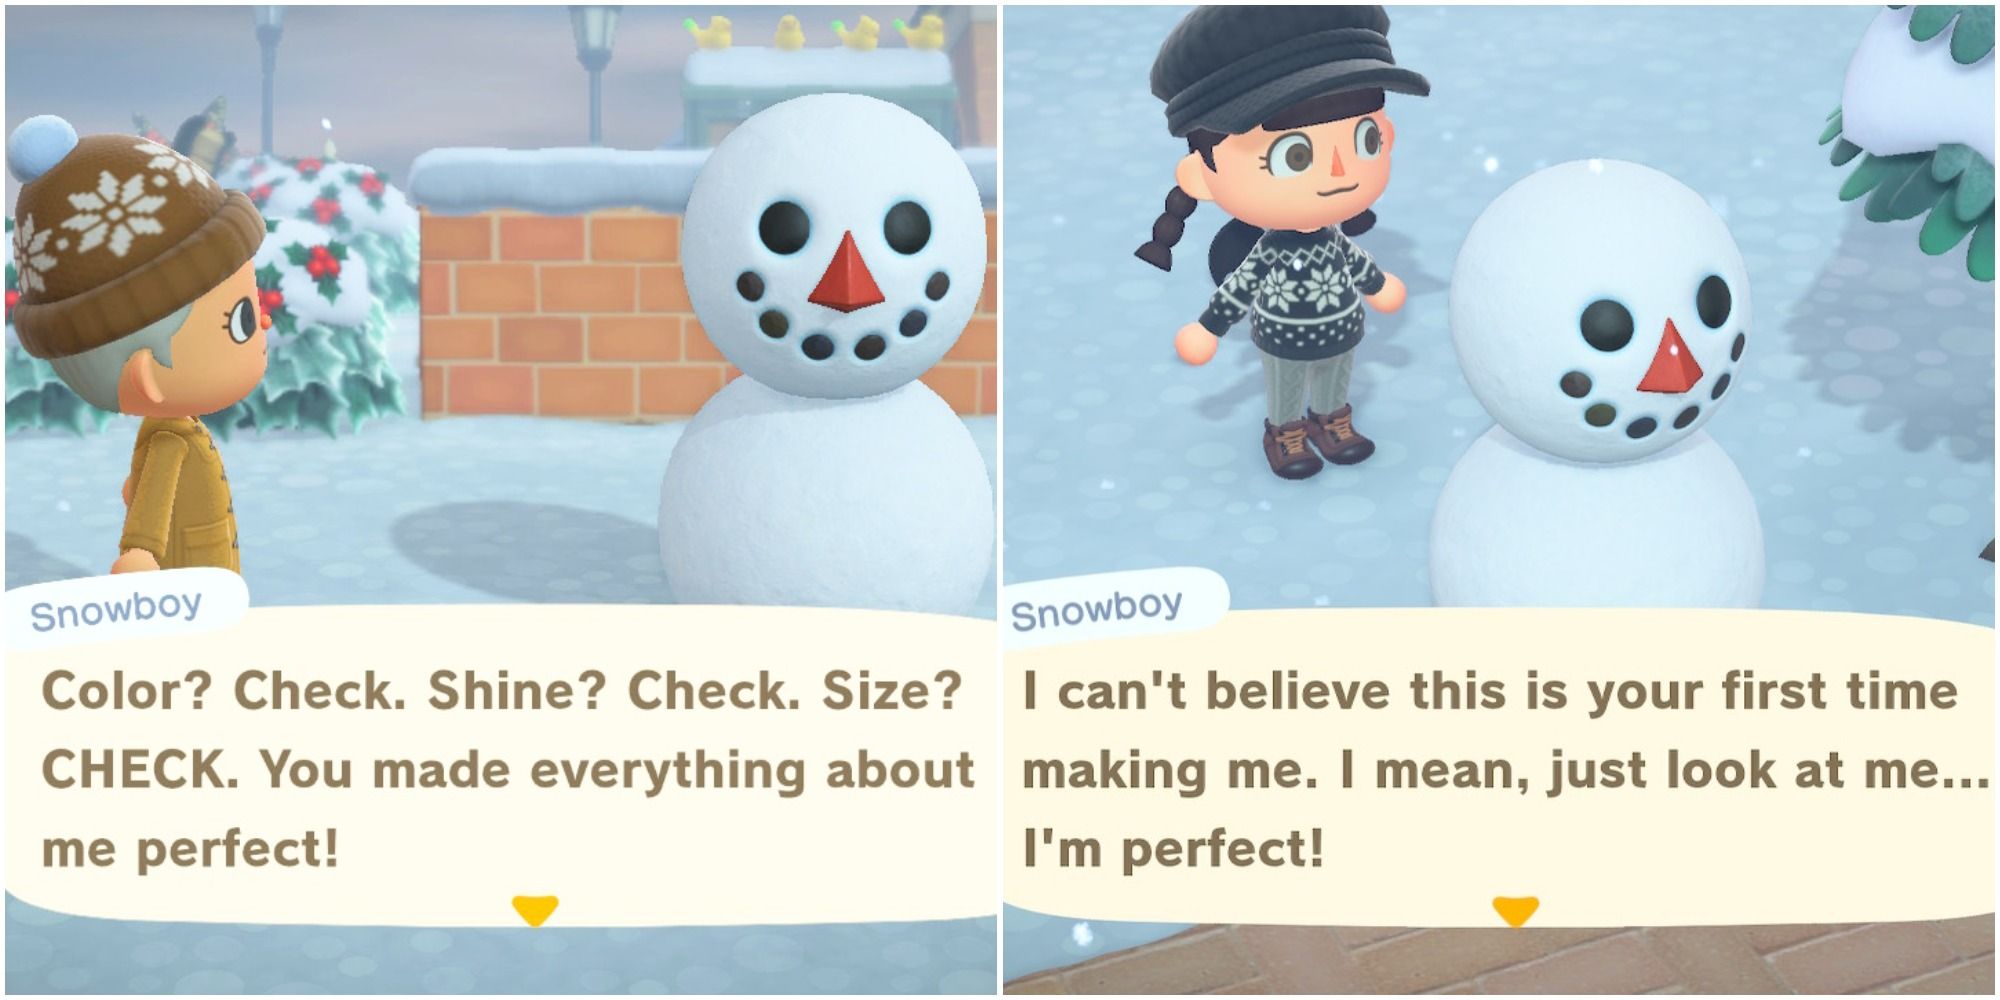 Featured Image Animal Crossing New Horizons villager and perfect snowboy